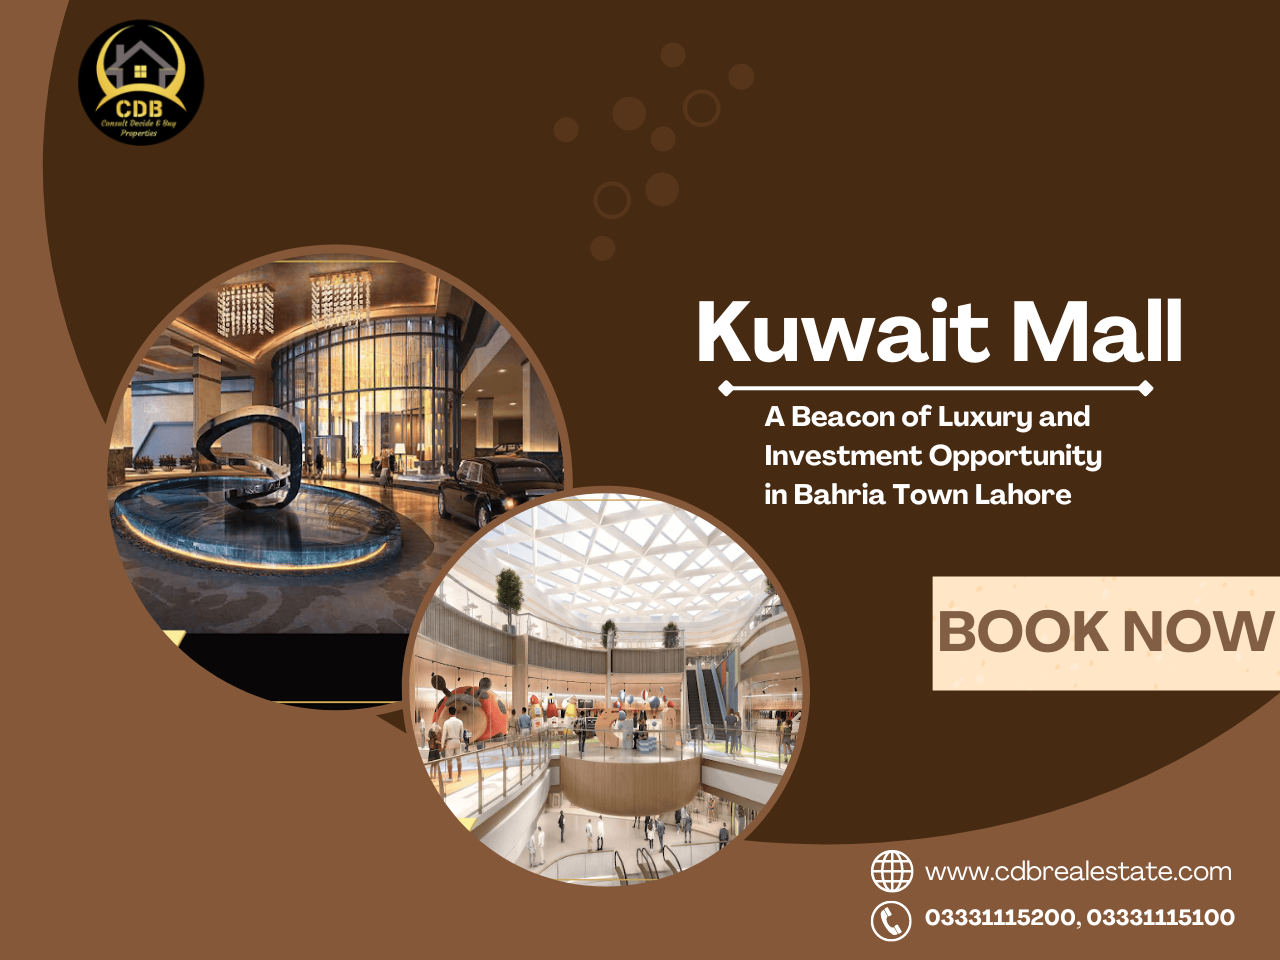 Kuwait Mall A Beacon of Luxury and Investment Opportunity in Bahria Town Lahore